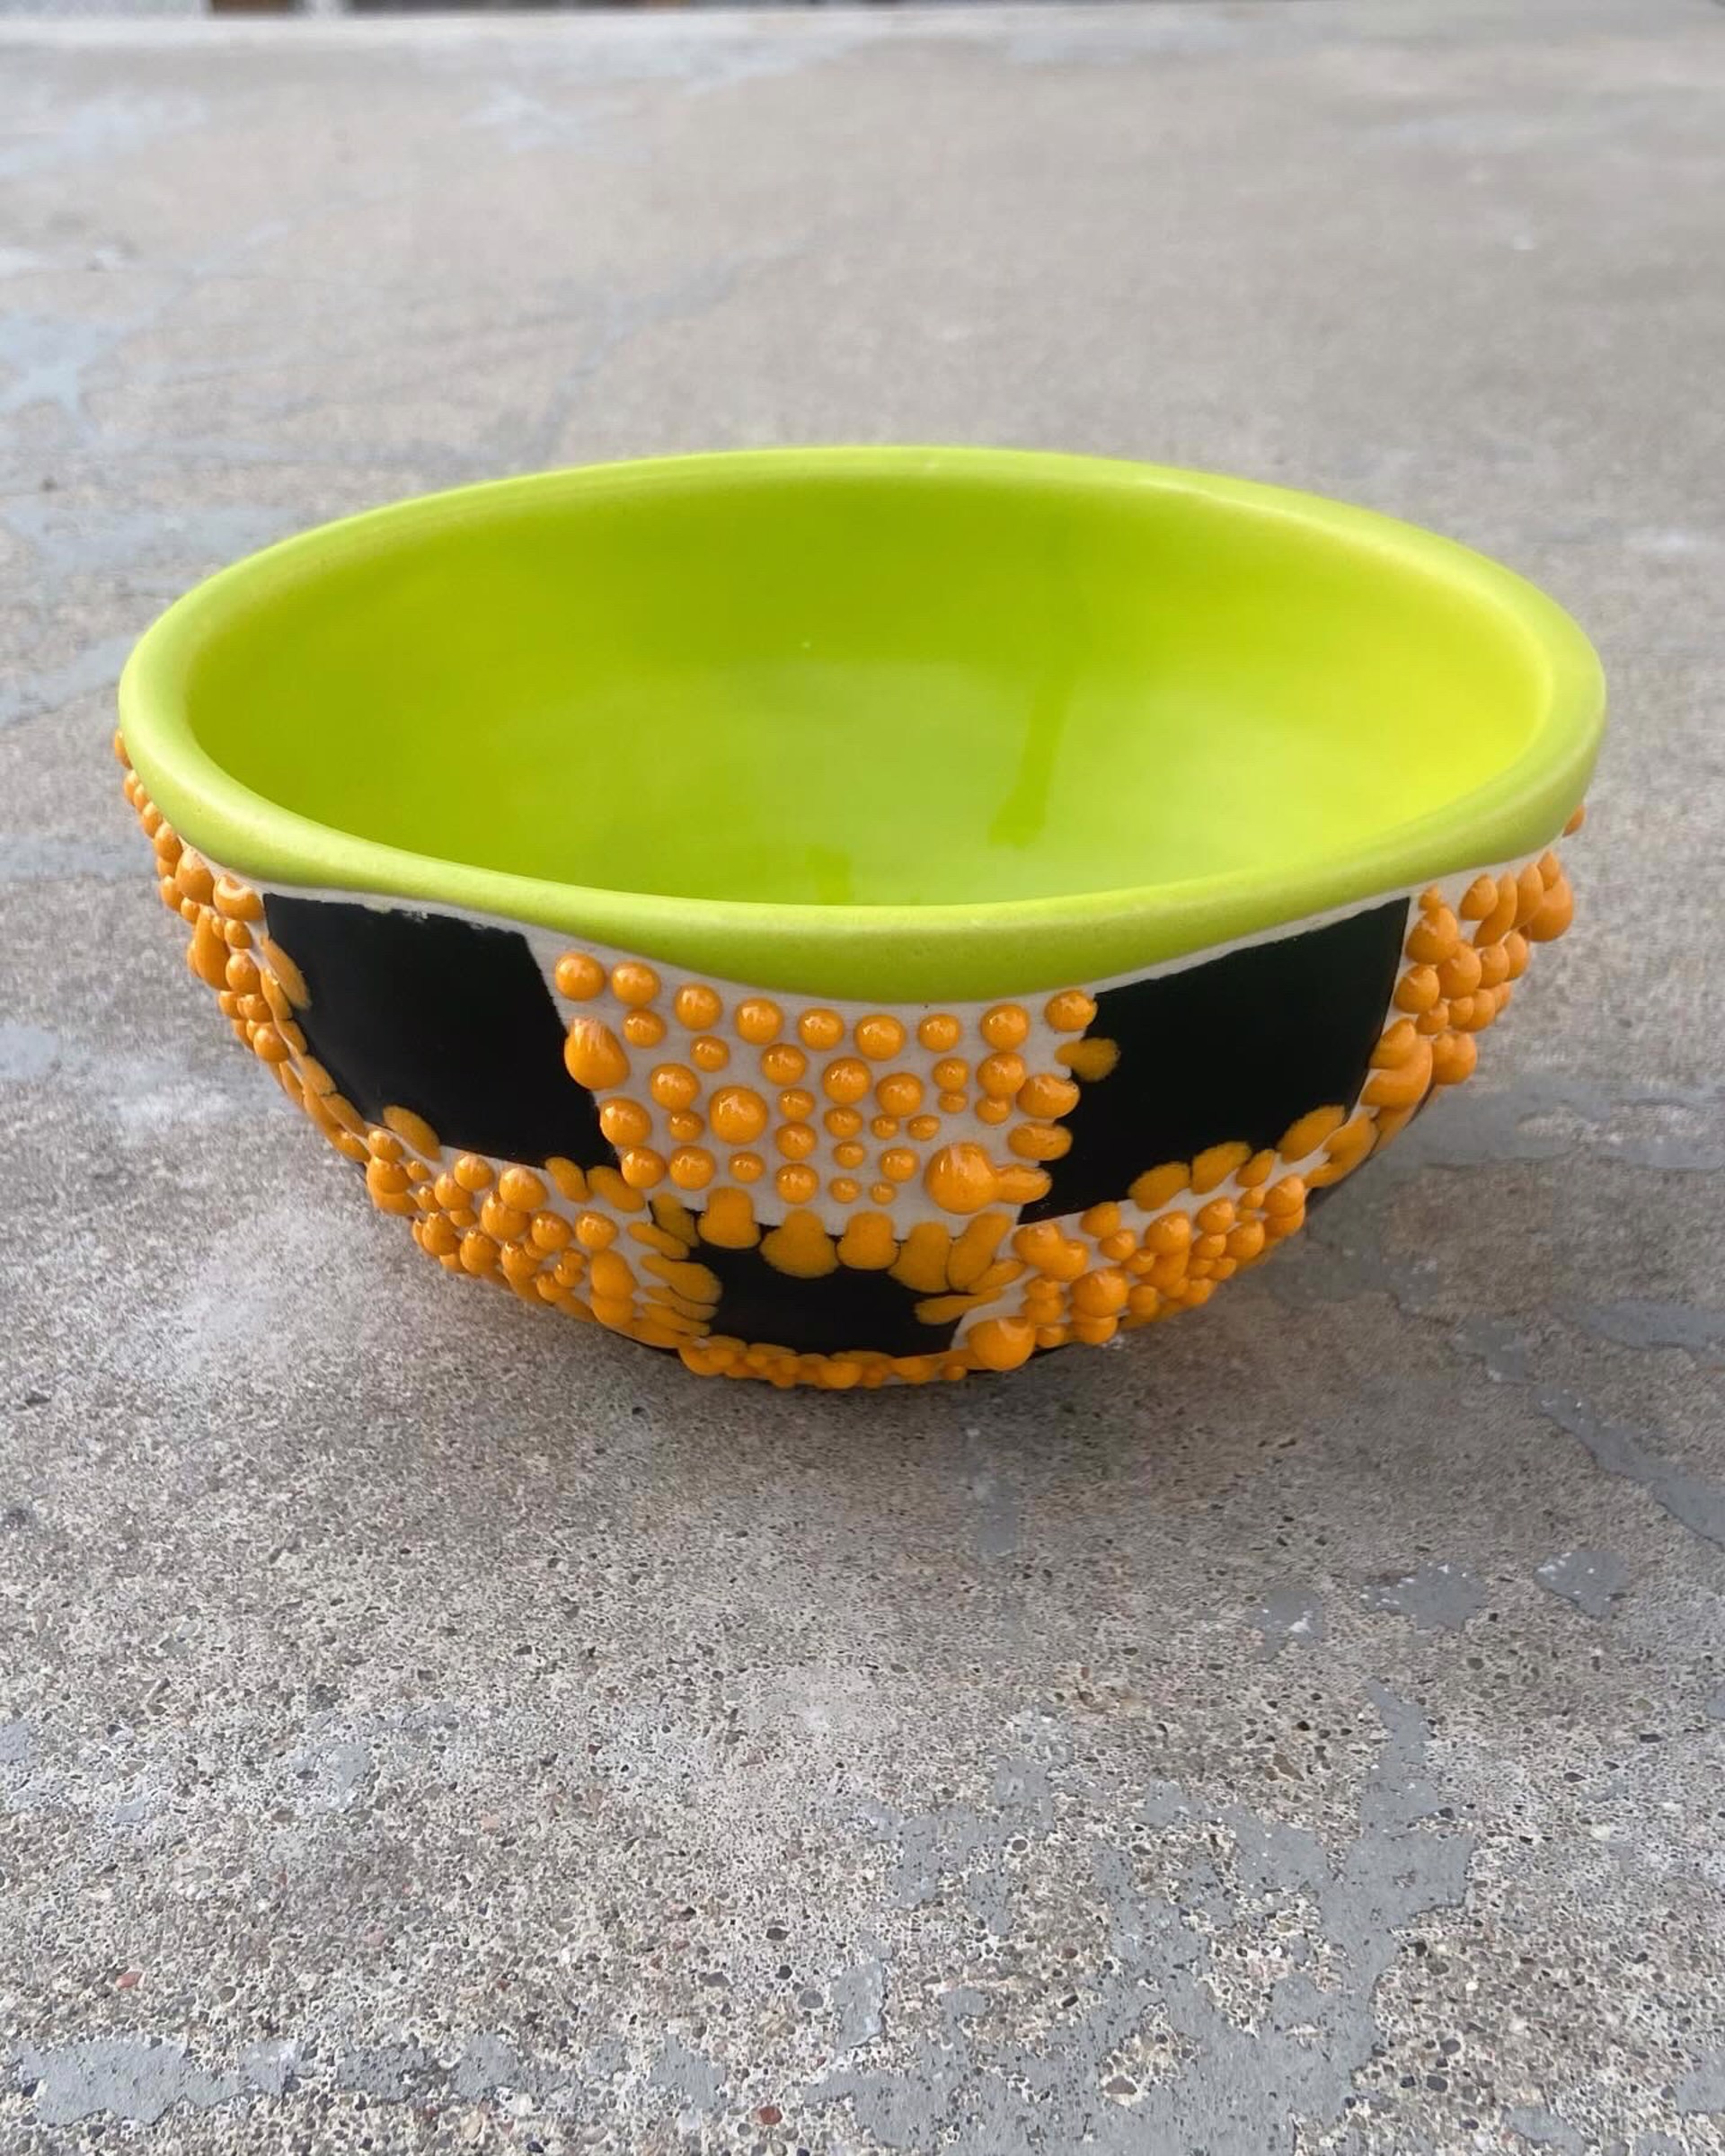 Checkered Gloopy Bowl 02 by Cassie Sullivan